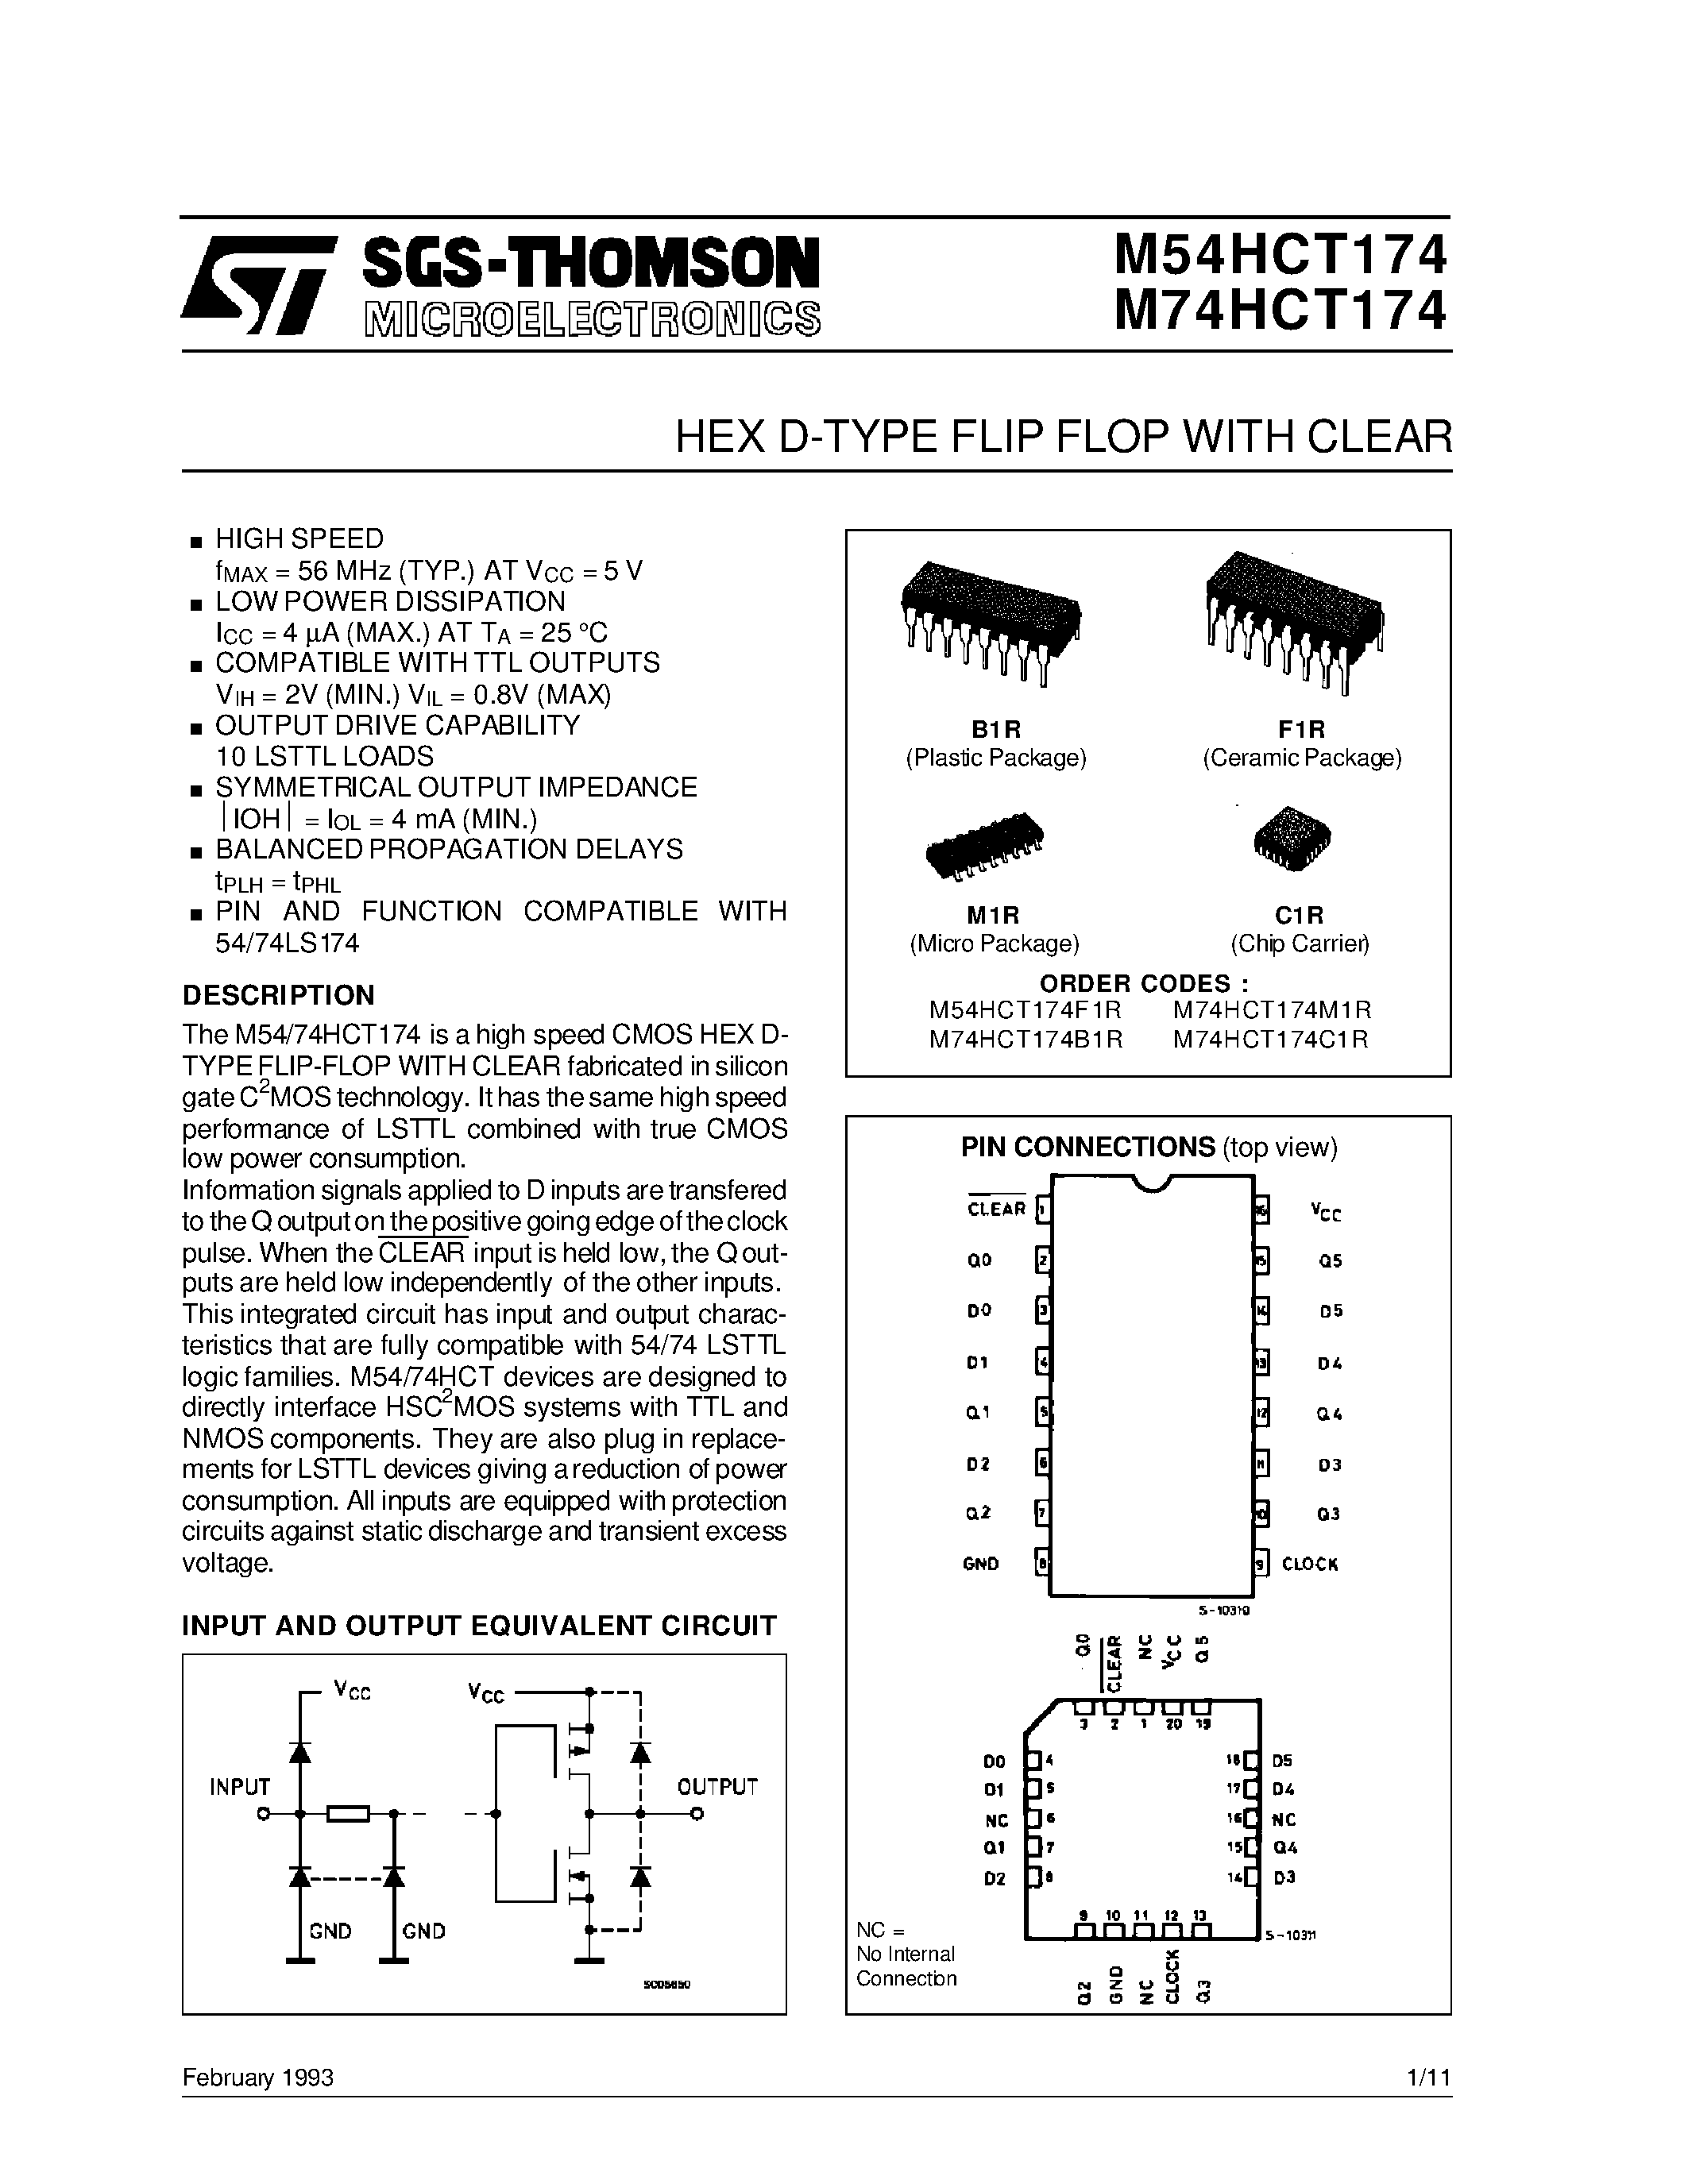 Datasheet M74HCT174 - HEX D-TYPE FLIP FLOP WITH CLEAR page 1